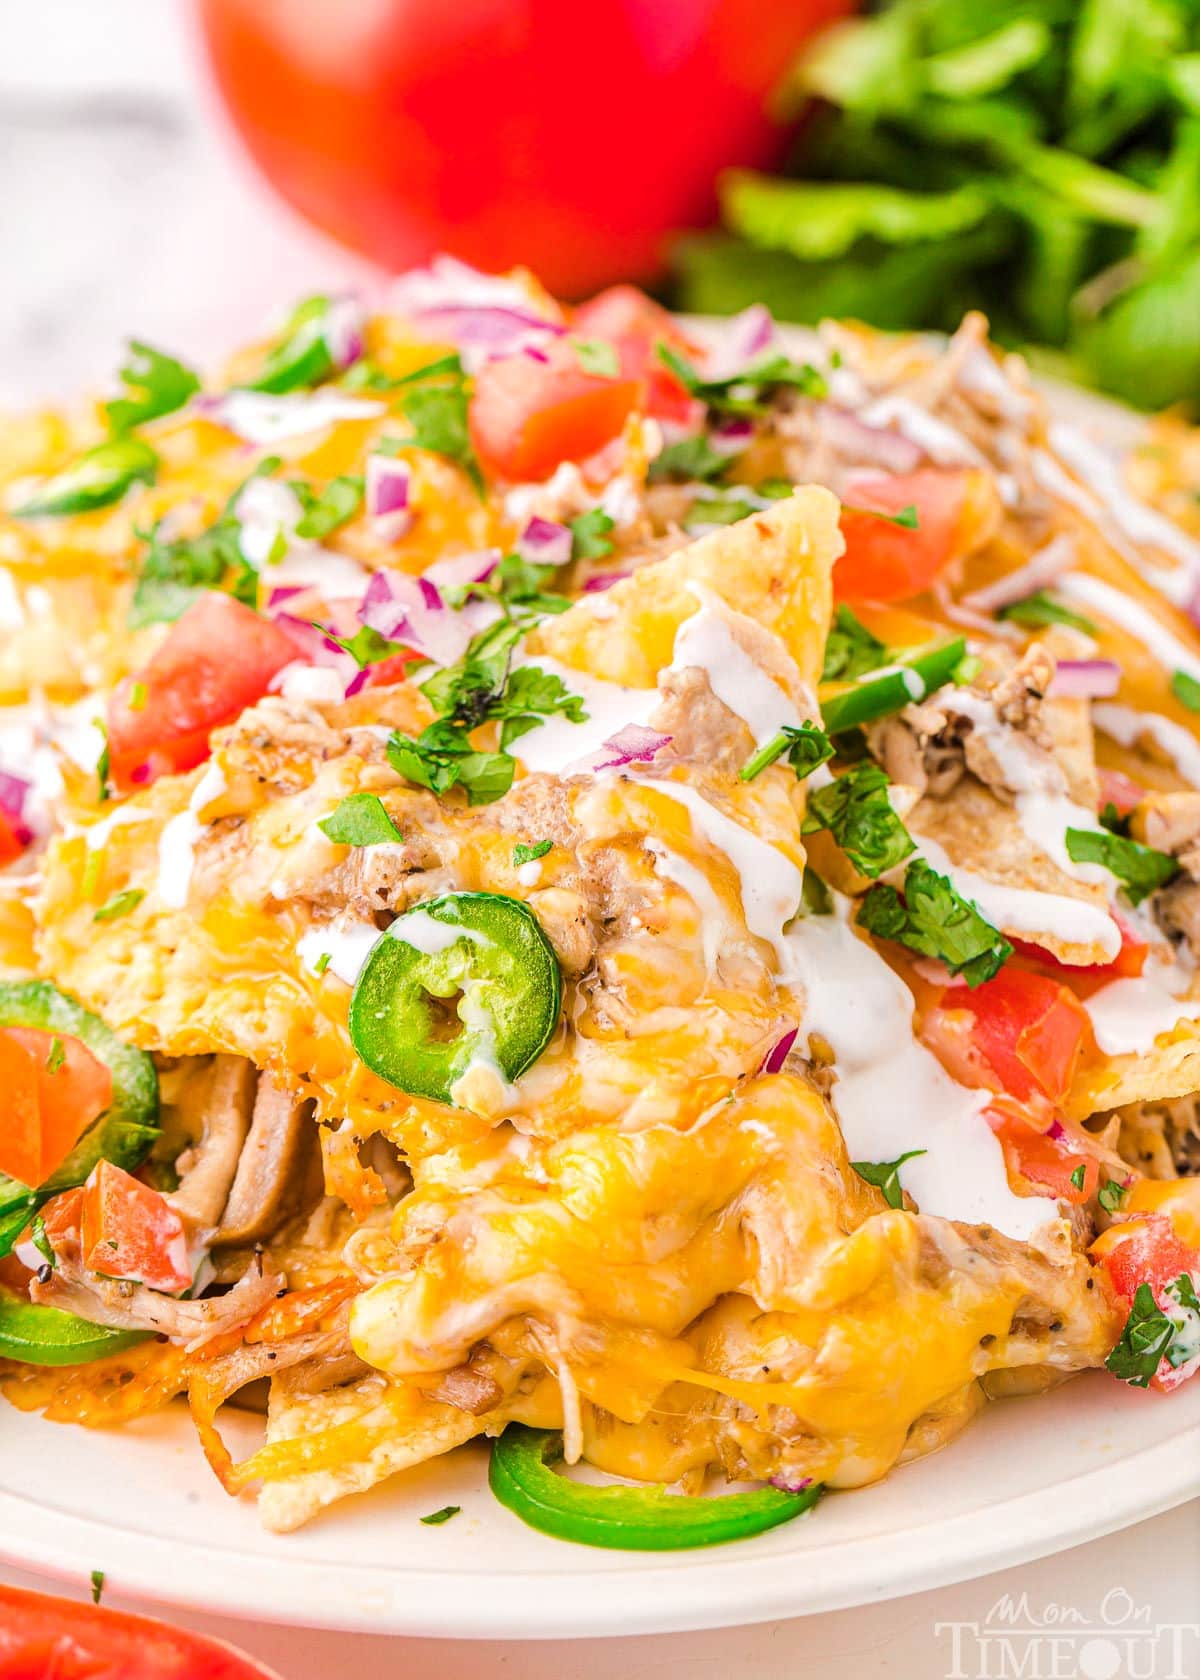 round white plate loaded high with pulled pork nachos topped with sour cream, jalapenos, tomatoes and red onions. a whole tomato and cilantro can be seen in the background.